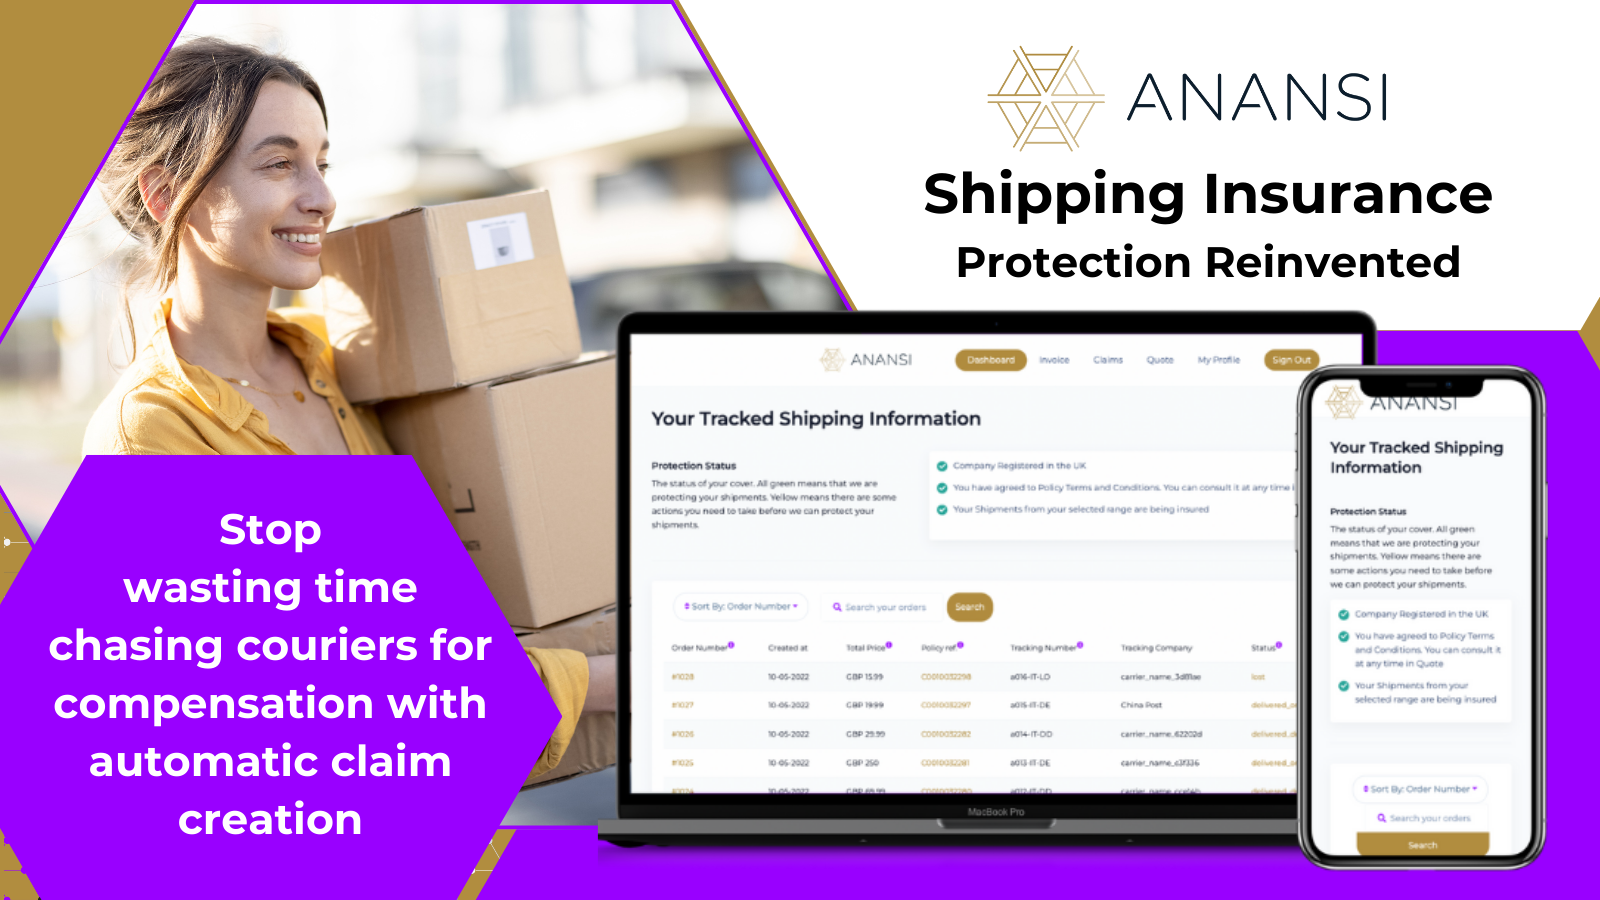 Shipping Insurance and protection reinvented